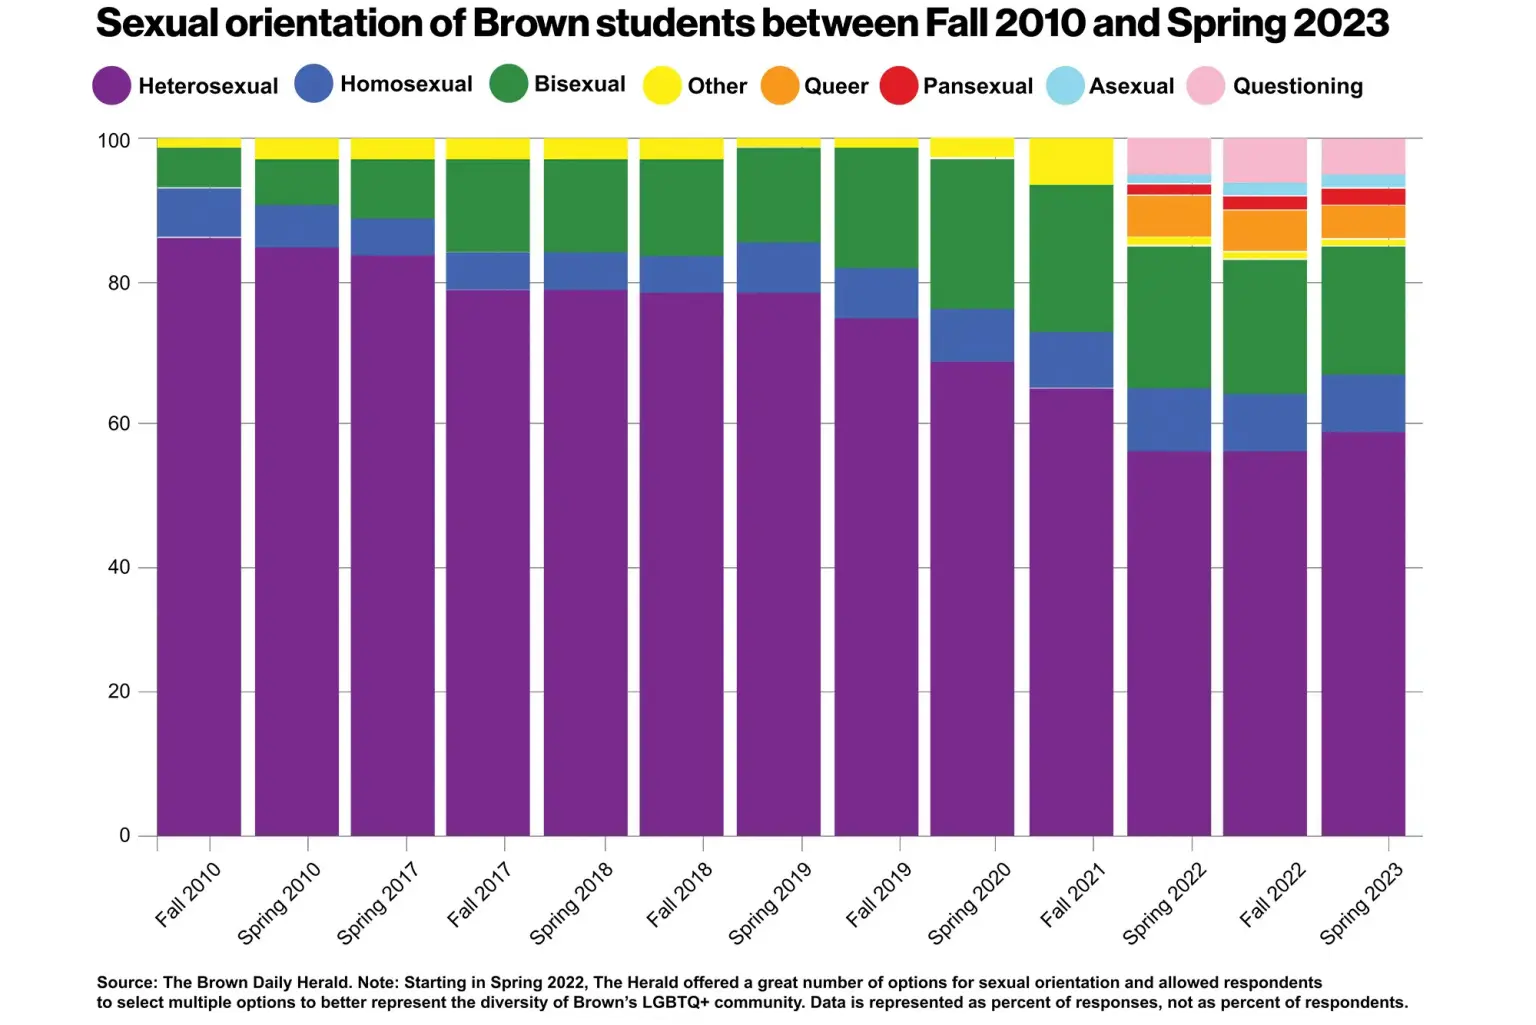 2023 07 21 Sextual Orientation of Brown Students betwwn fall 2010 and Spring 2023